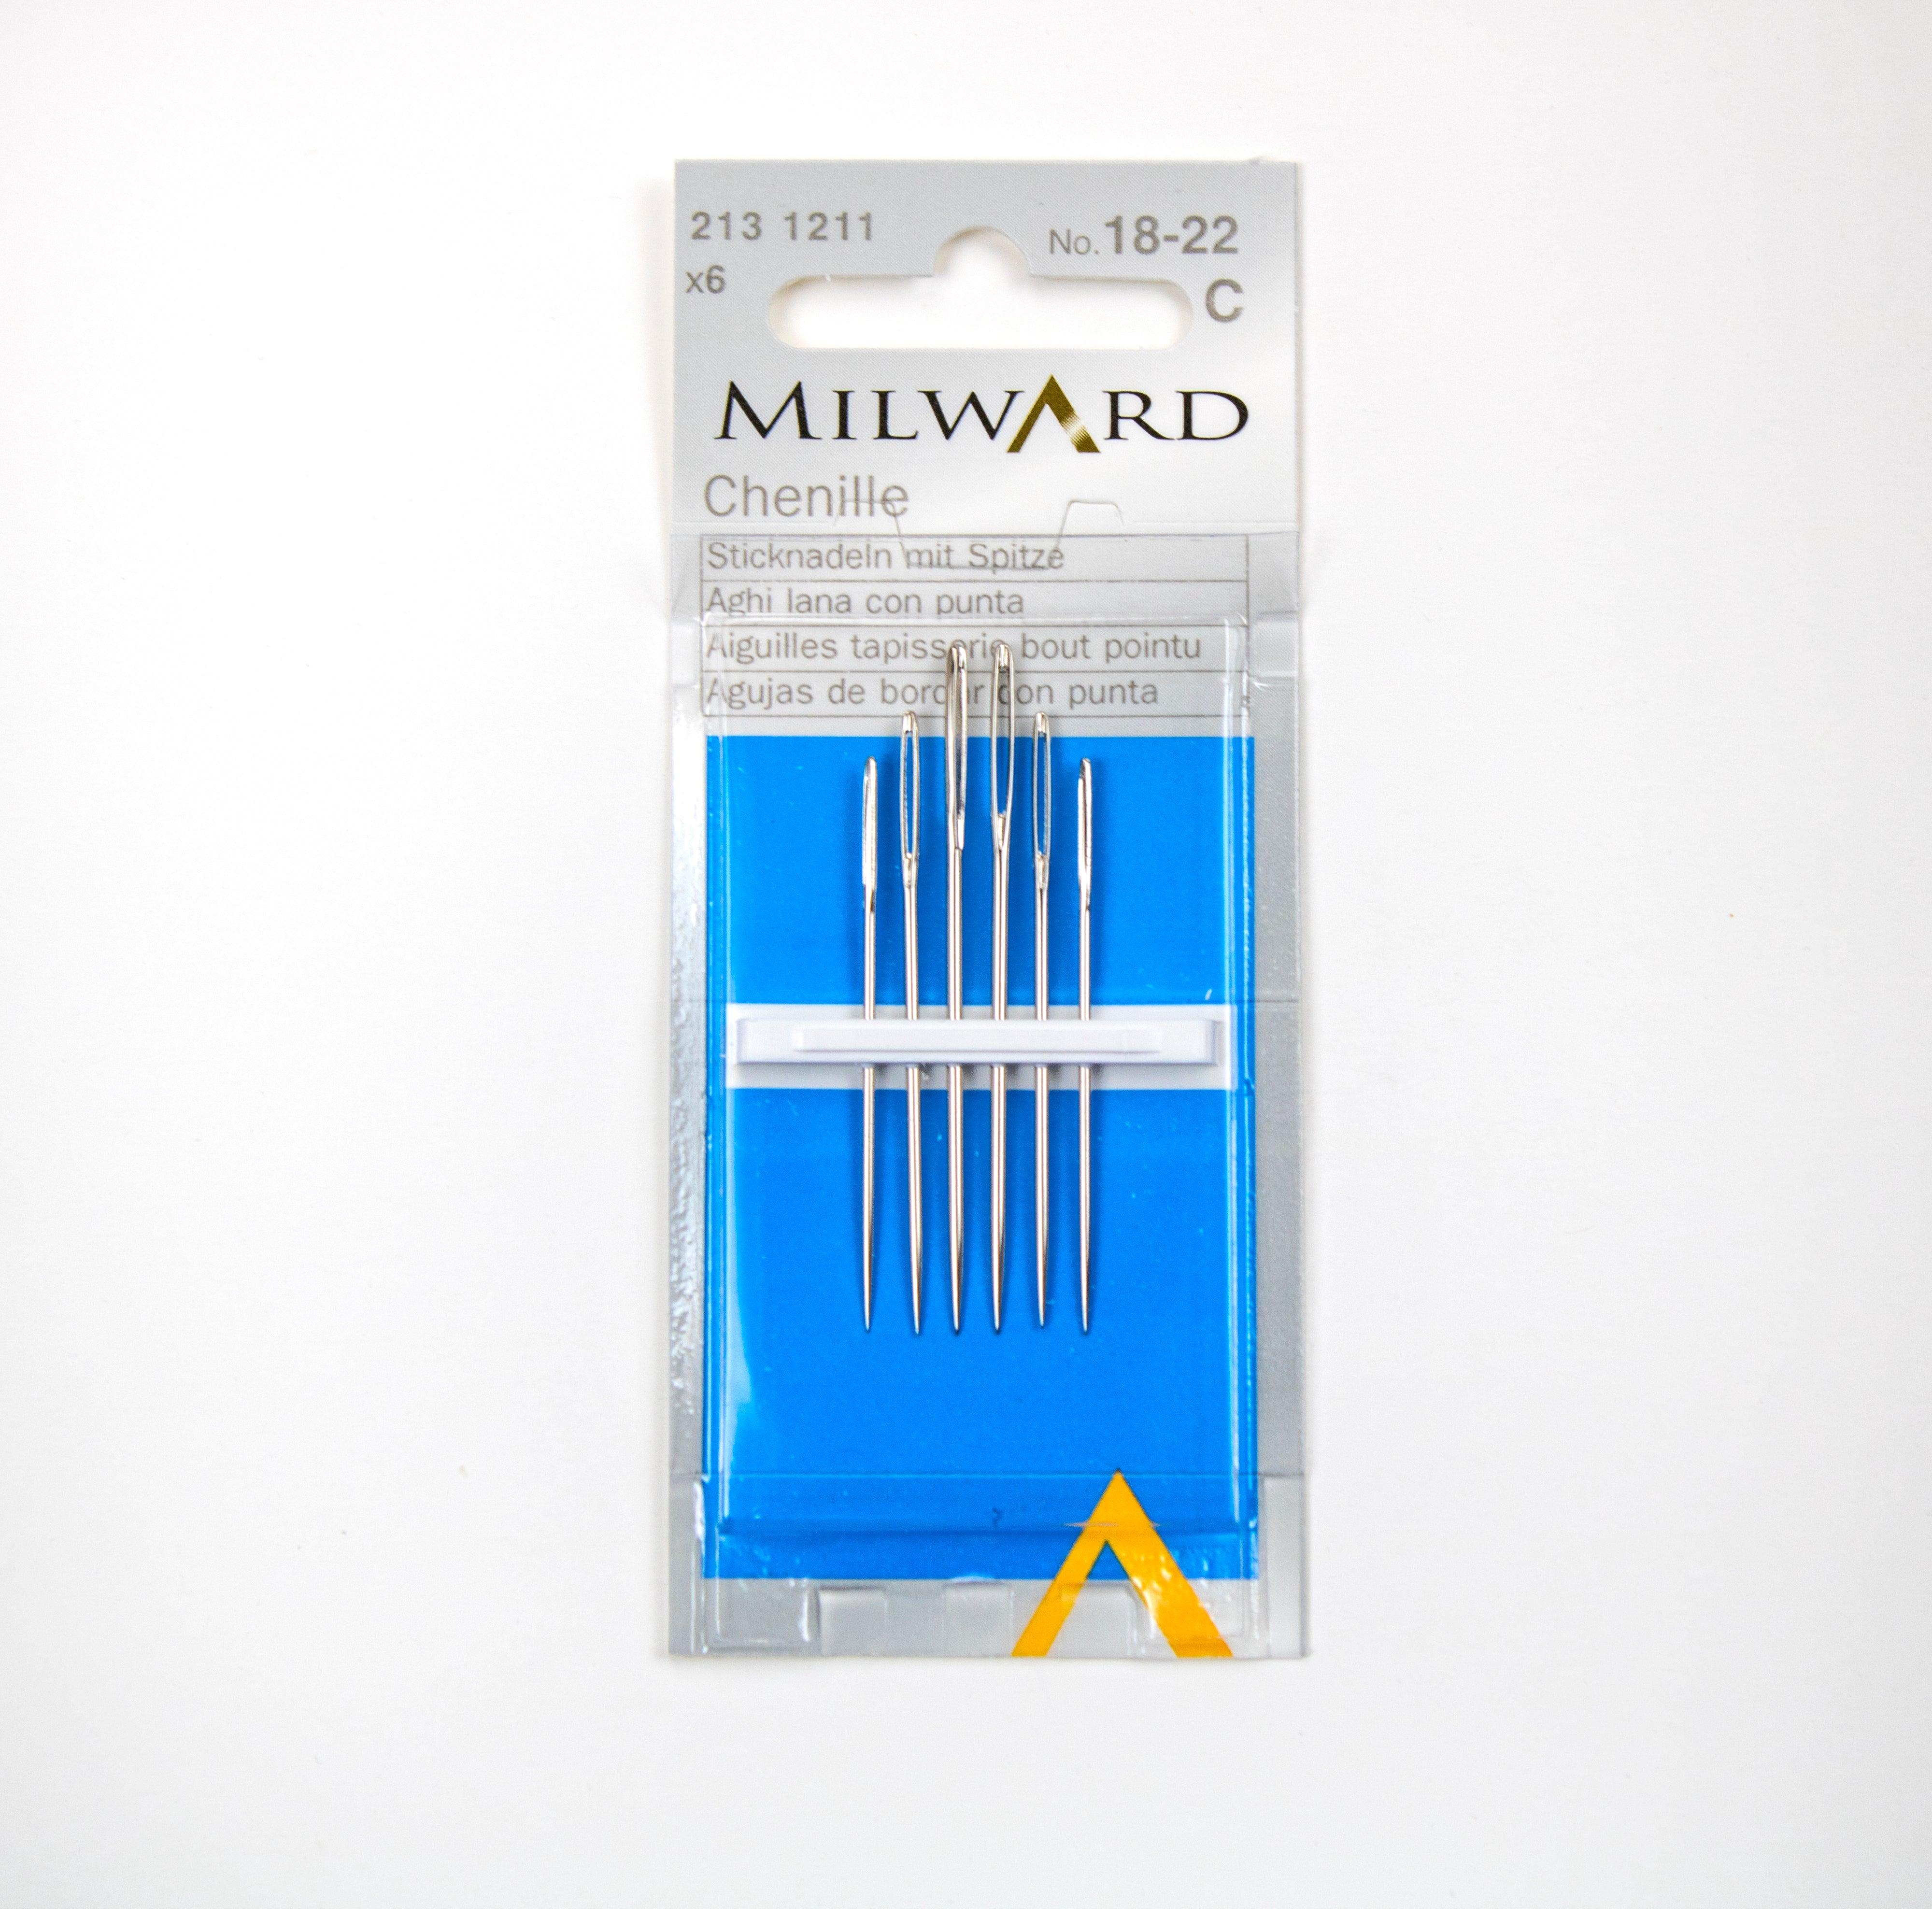 Milward Chenille Hand Needles No.18-22 - 6 Pack - Luca-S New